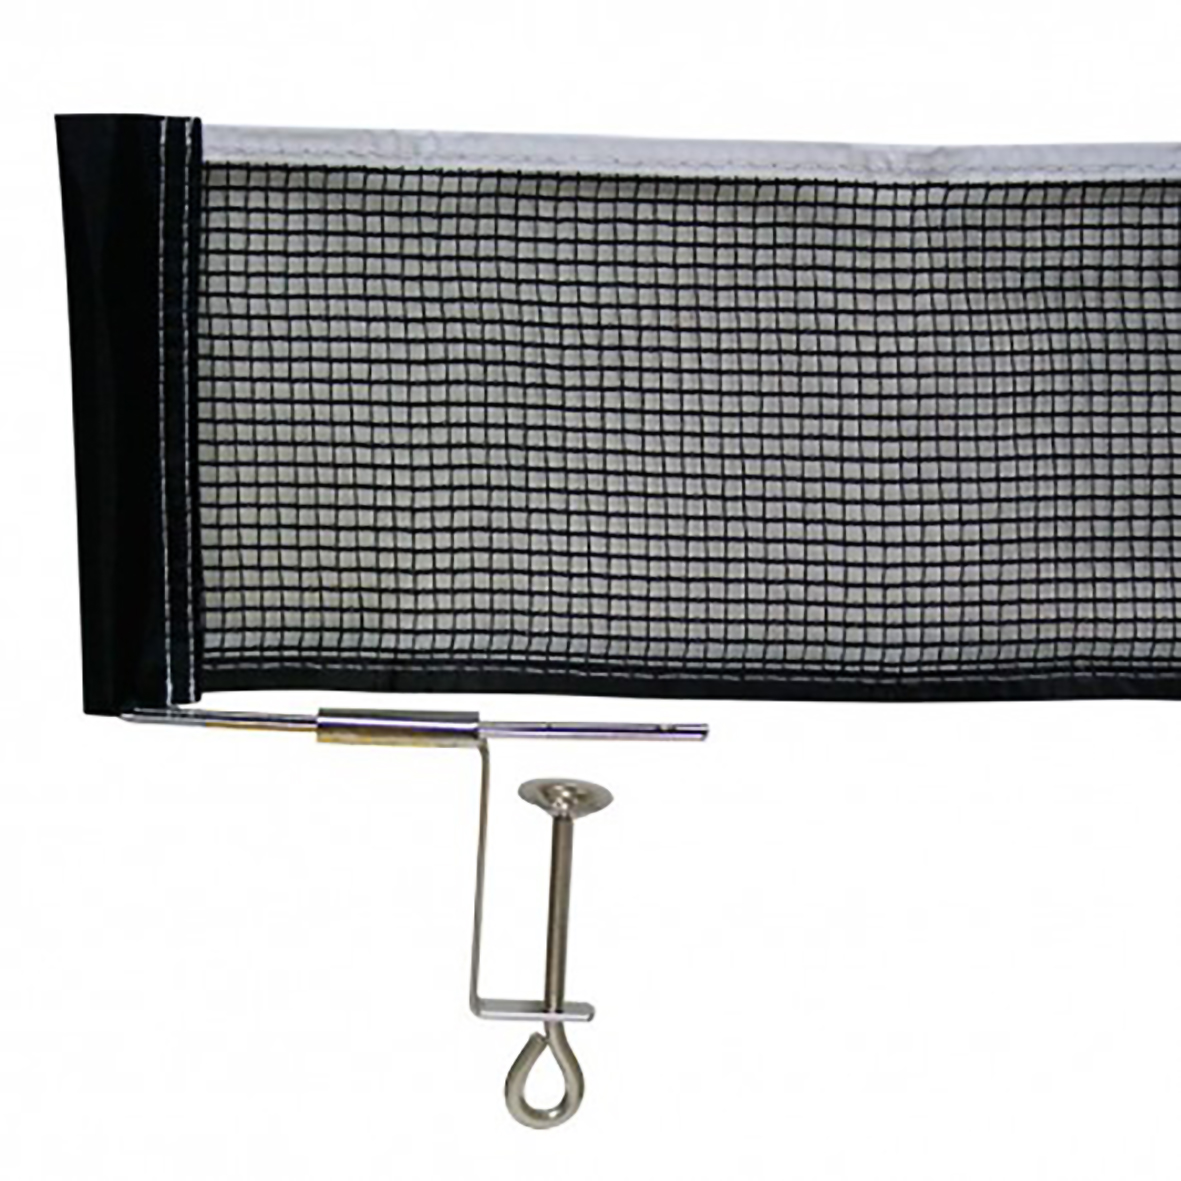 NB TT CLASSIC TABLE TENNIS NET AND STAND SET.